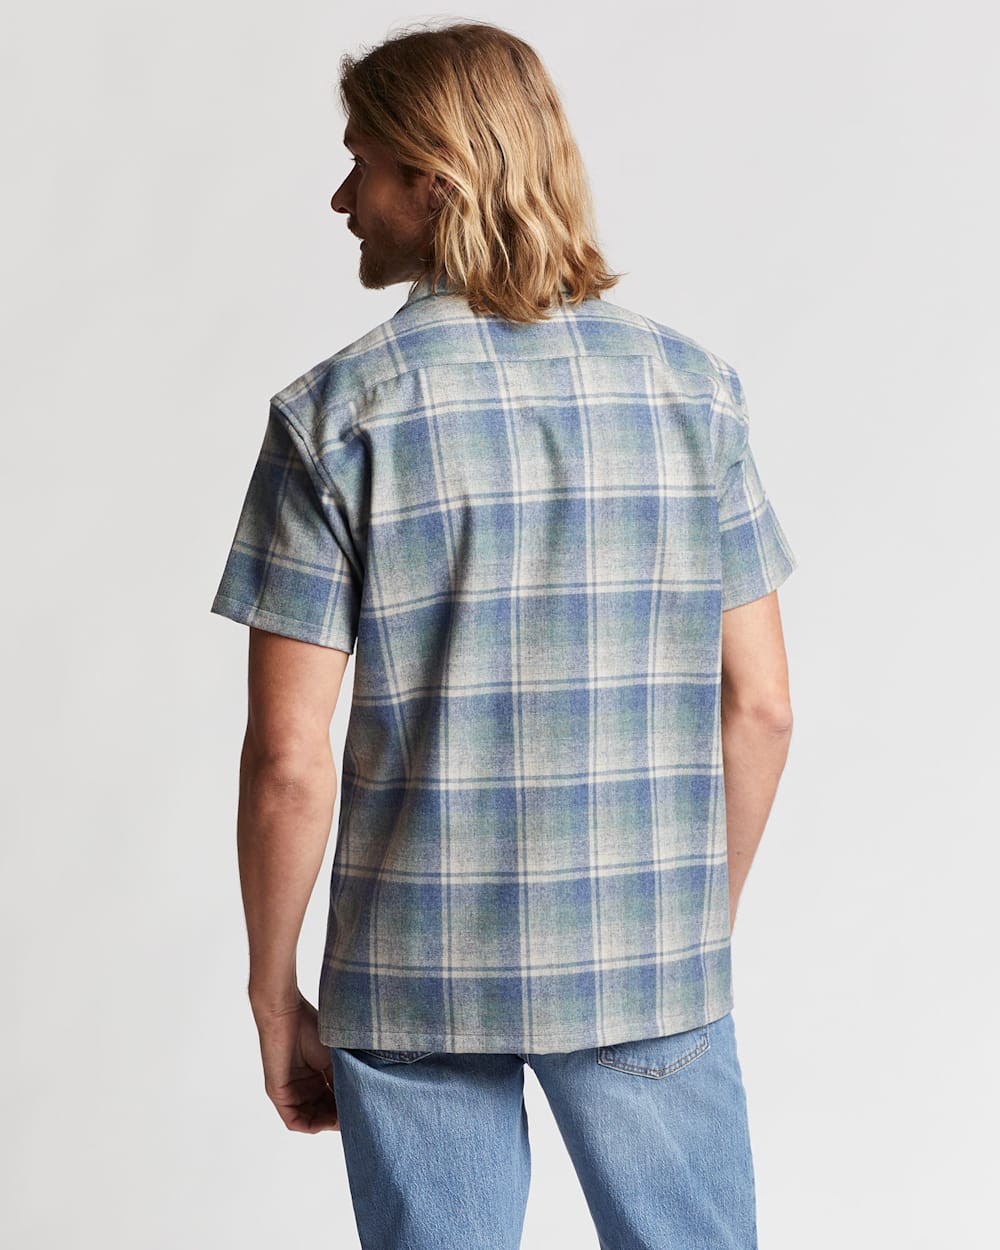 ALTERNATE VIEW OF MEN'S PLAID SHORT-SLEEVE BOARD SHIRT IN BLUE MIX PLAID image number 3